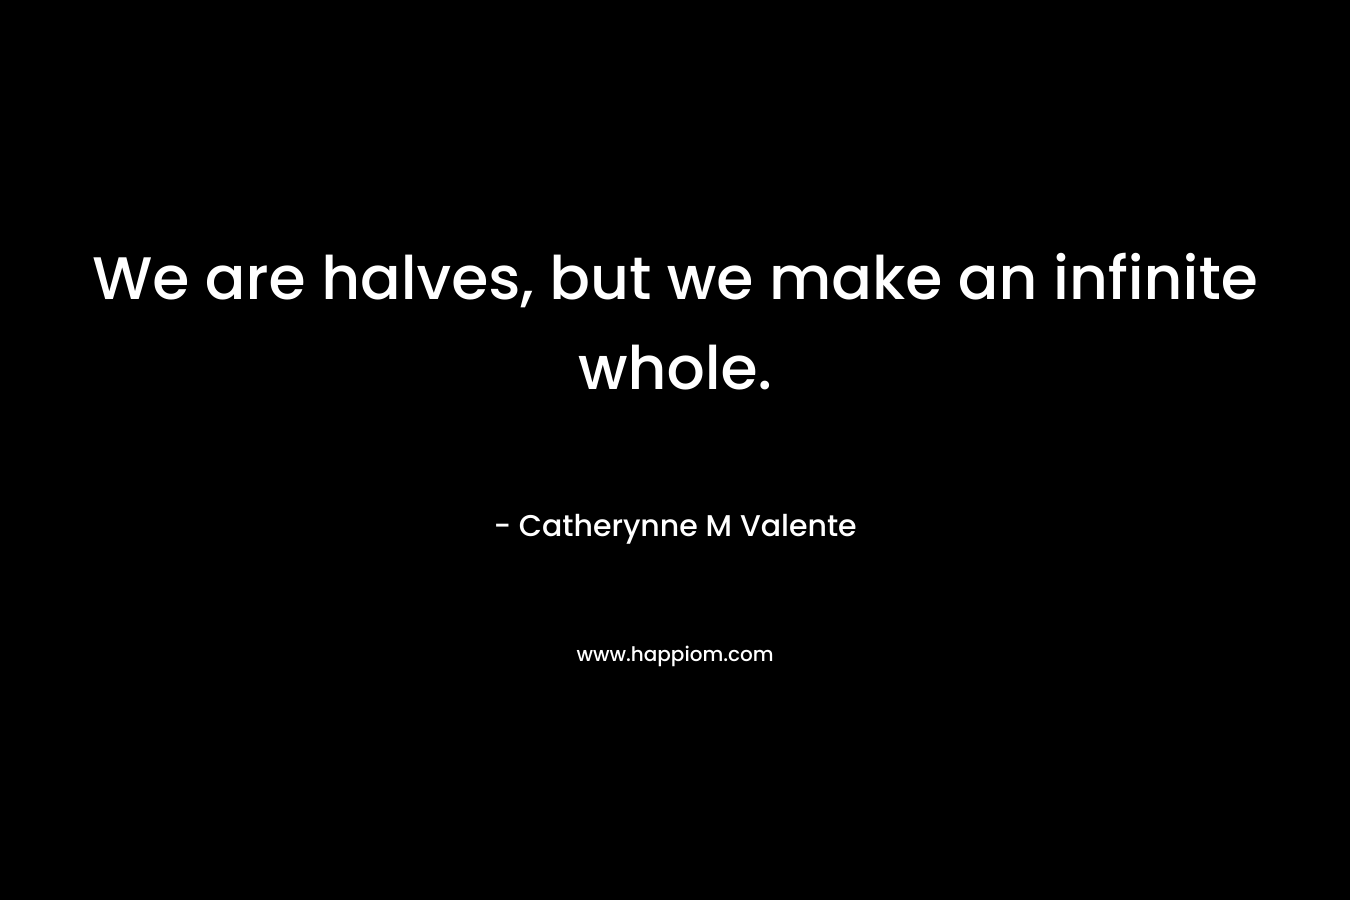 We are halves, but we make an infinite whole. – Catherynne M Valente